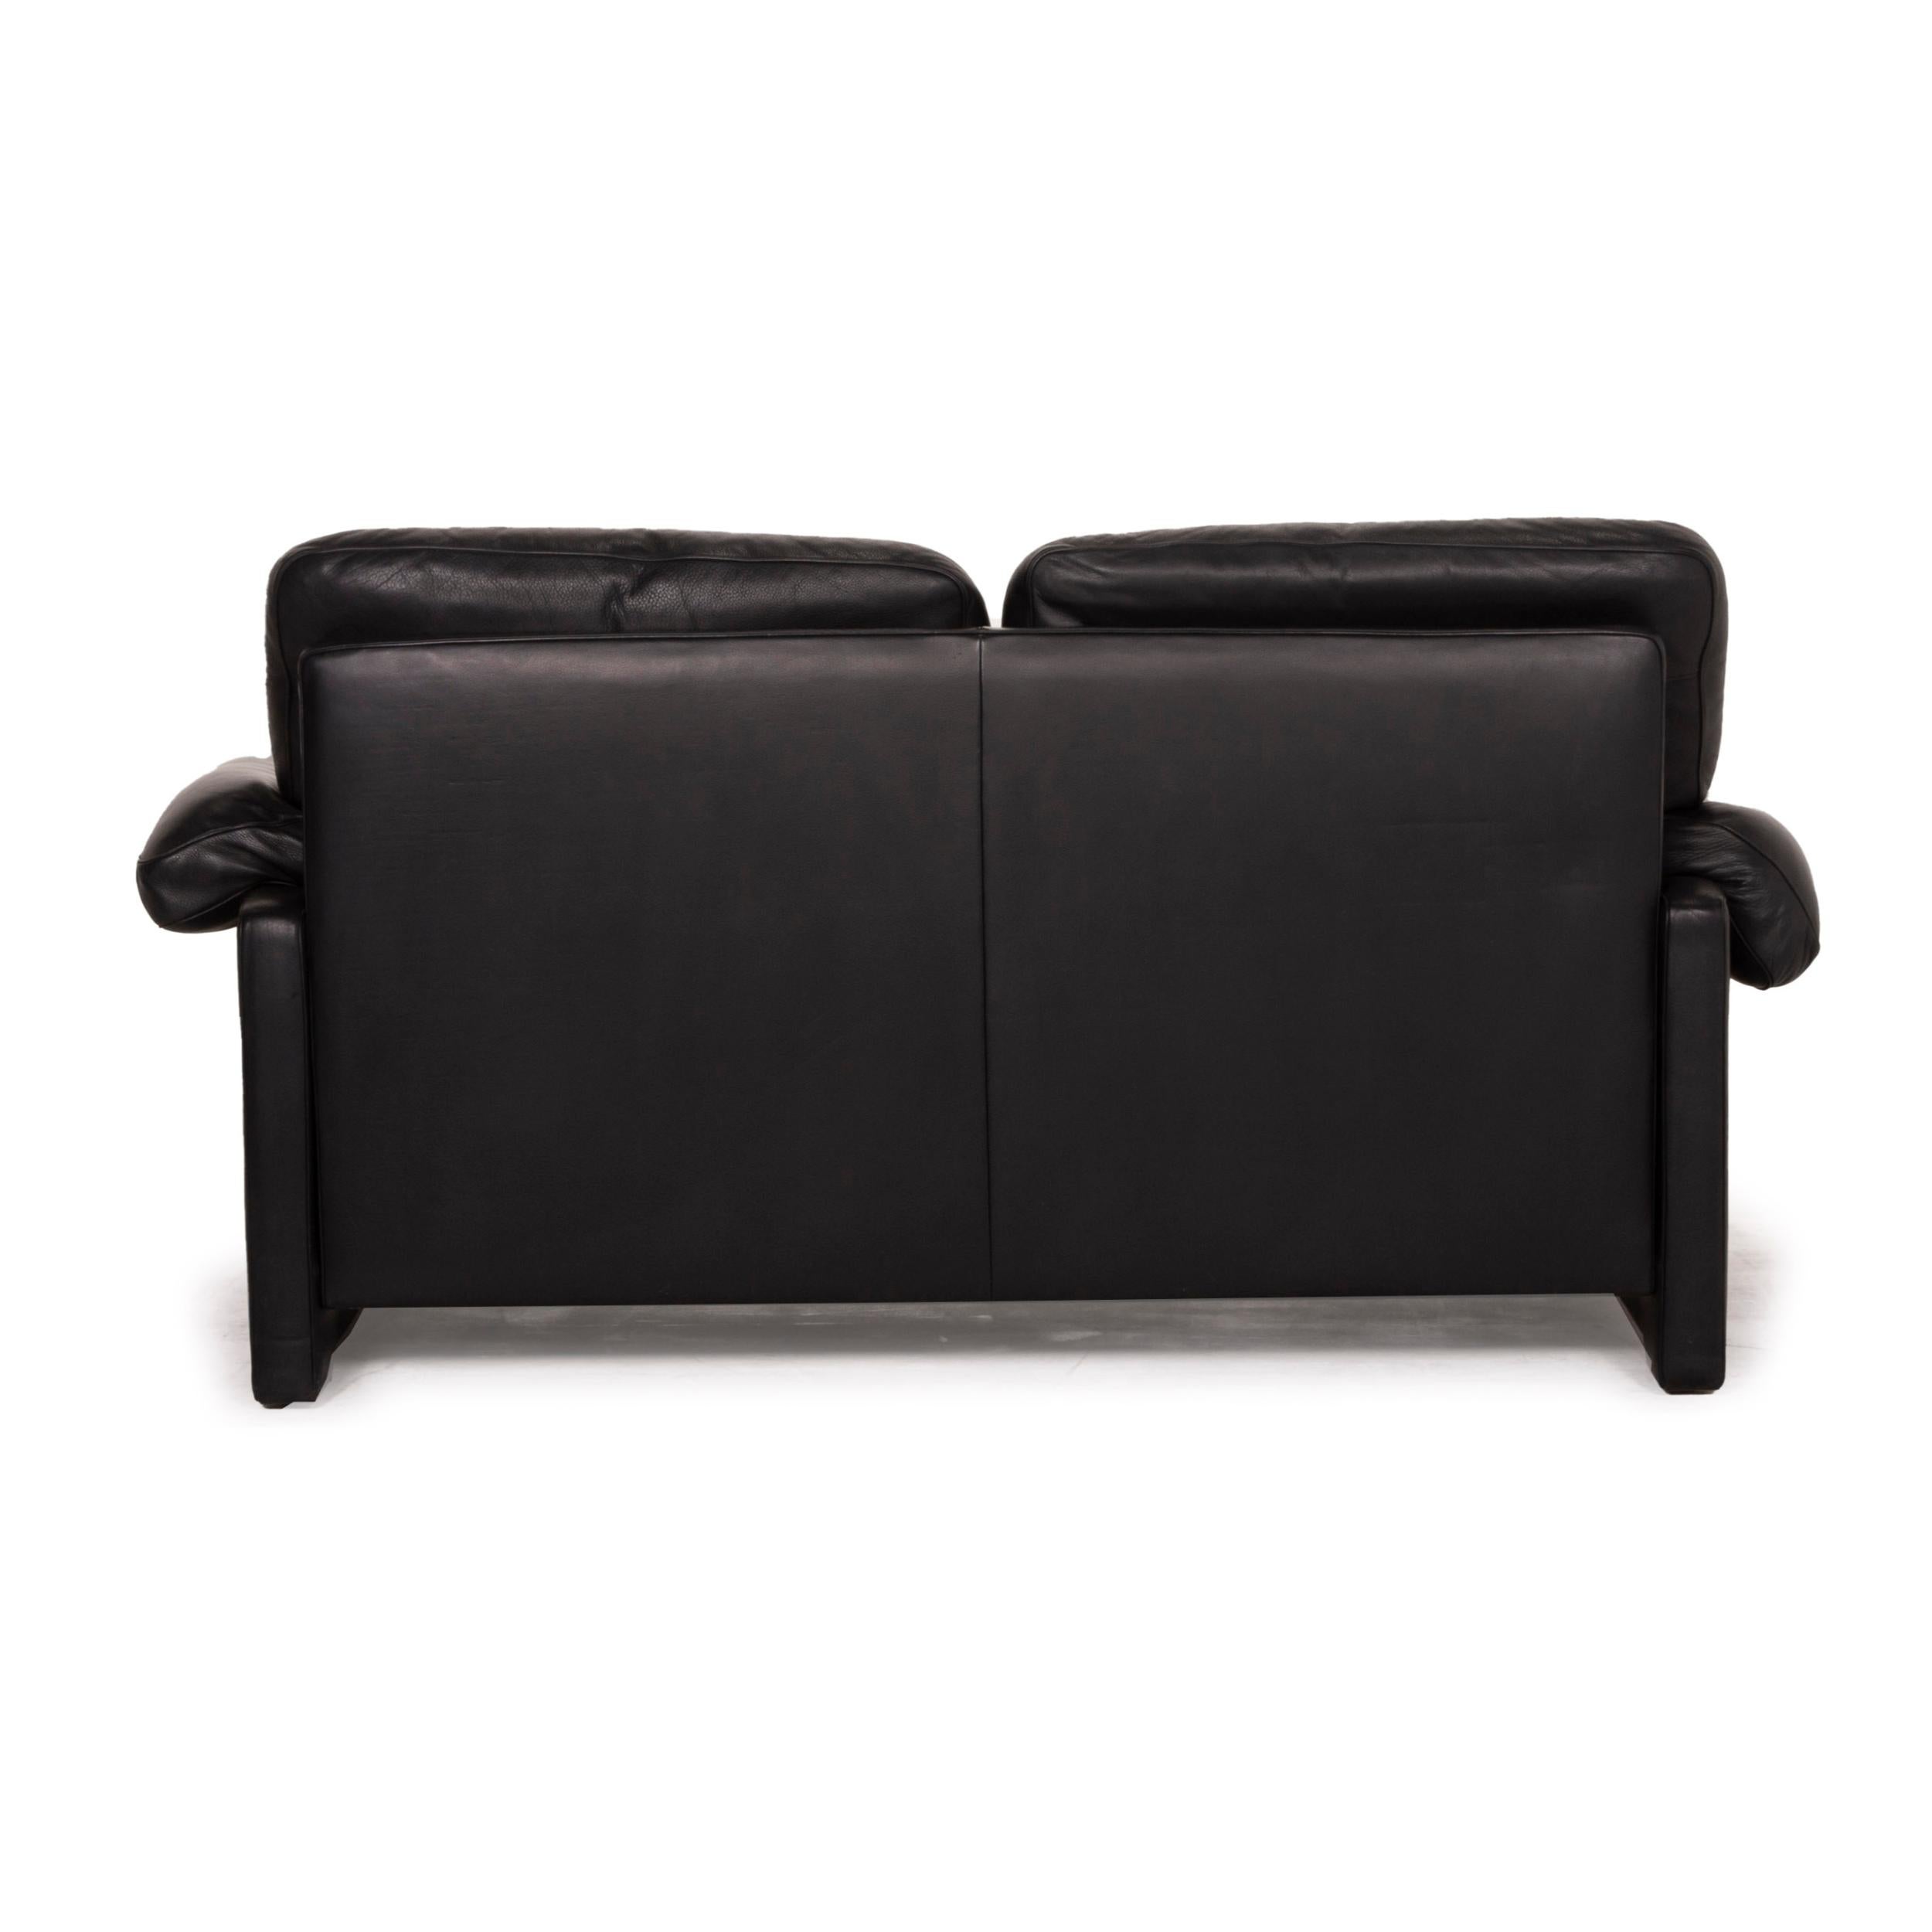 De Sede ds 70 Leather Sofa Black Two-Seater For Sale 4